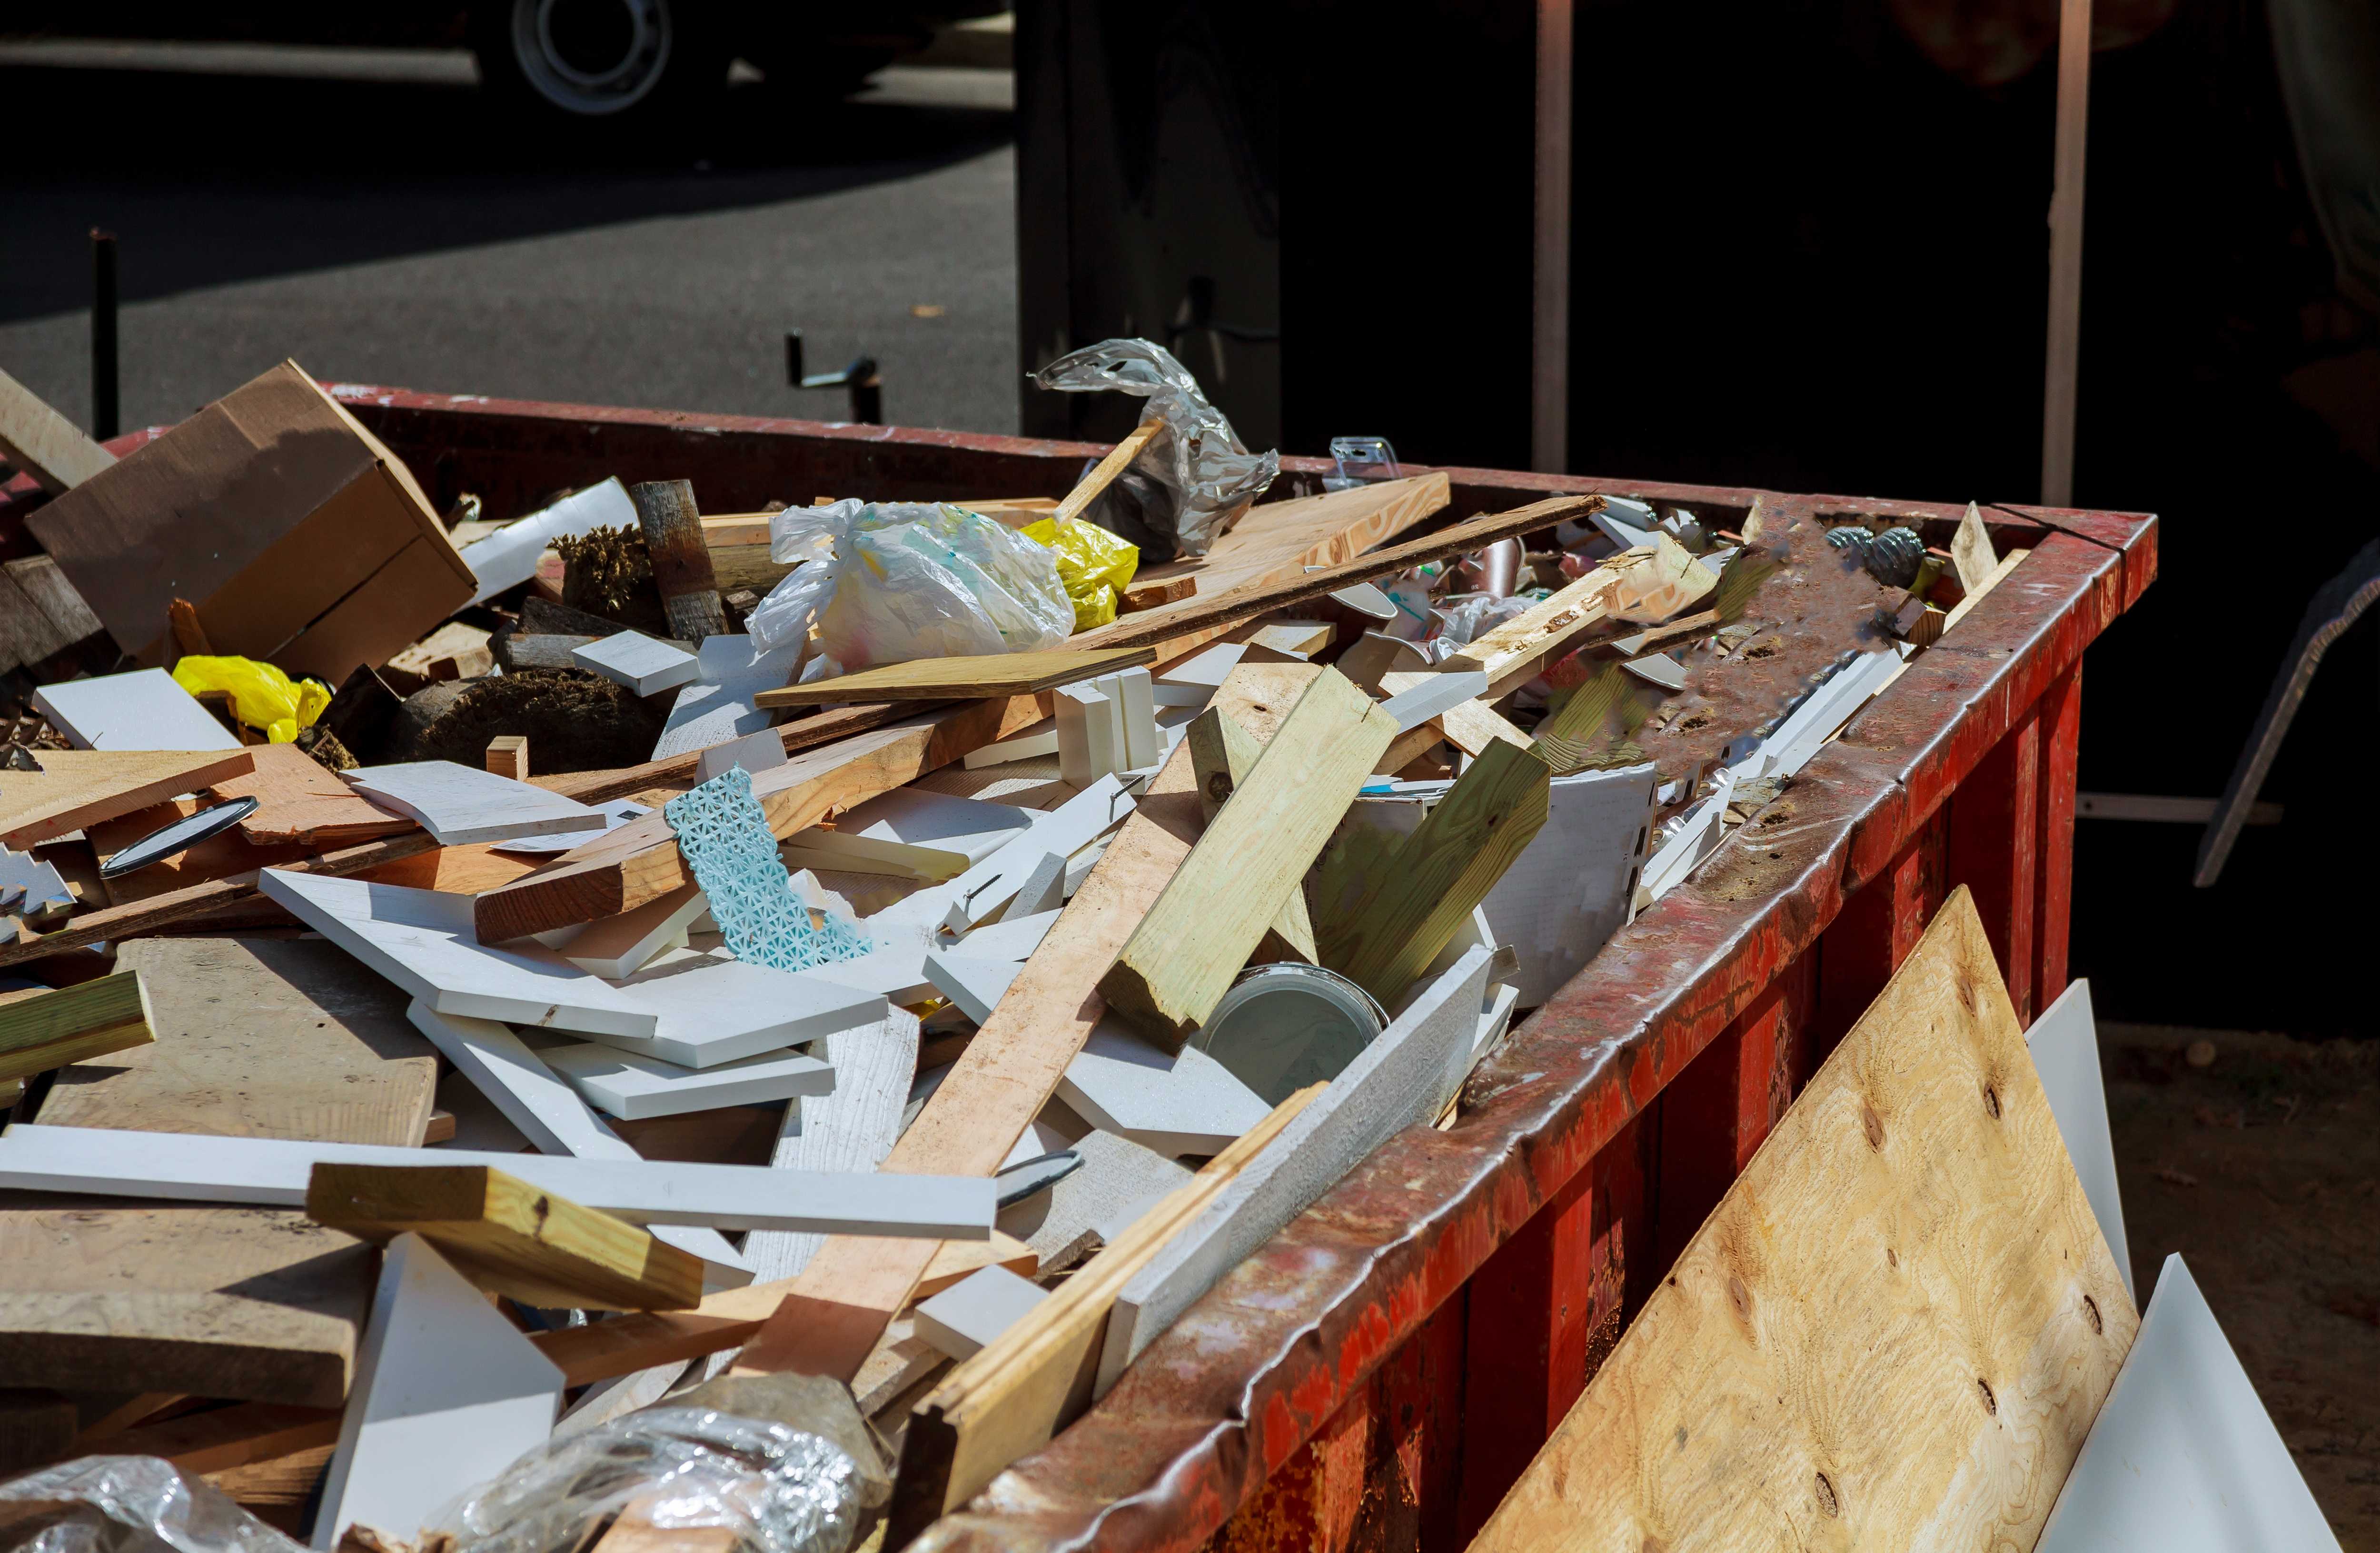 Local Skip Hire Services in Clapham